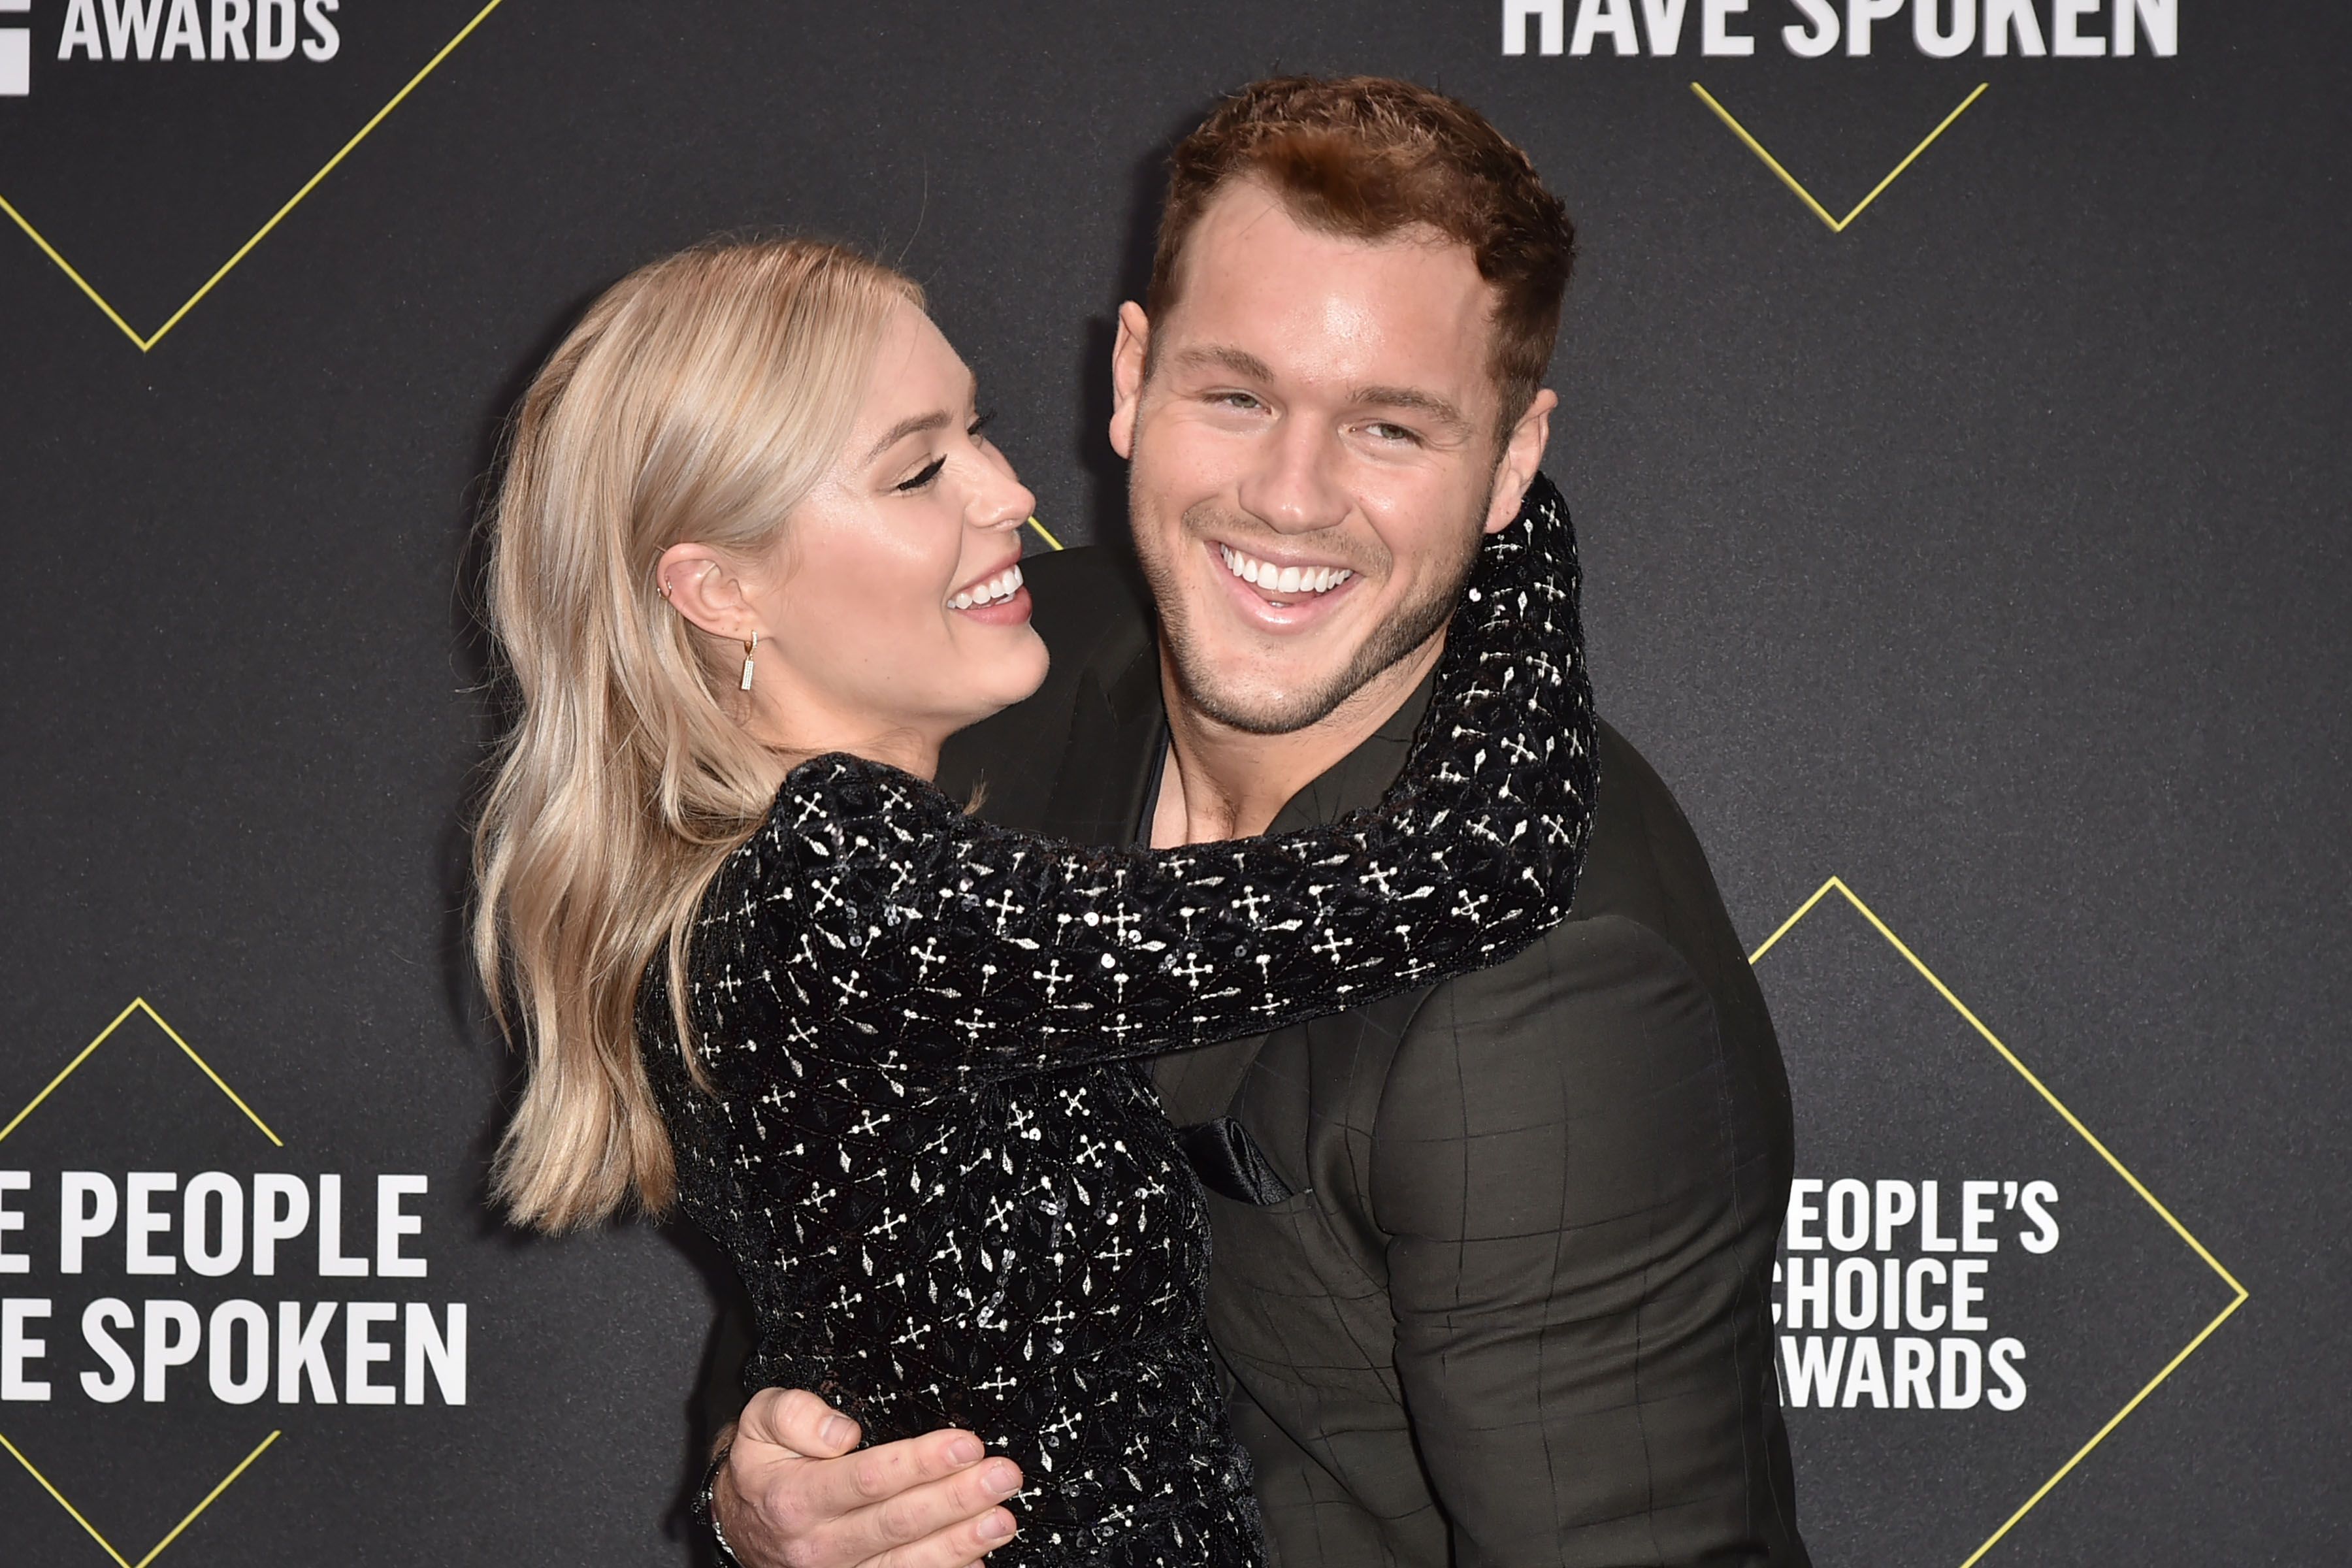 Cassie Randolph and Colton Underwood during E! People's Choice Awards 2018 - Arrivals at The Barker Hanger on November 10, 2019 in Santa Monica, California. | Source: Getty Images